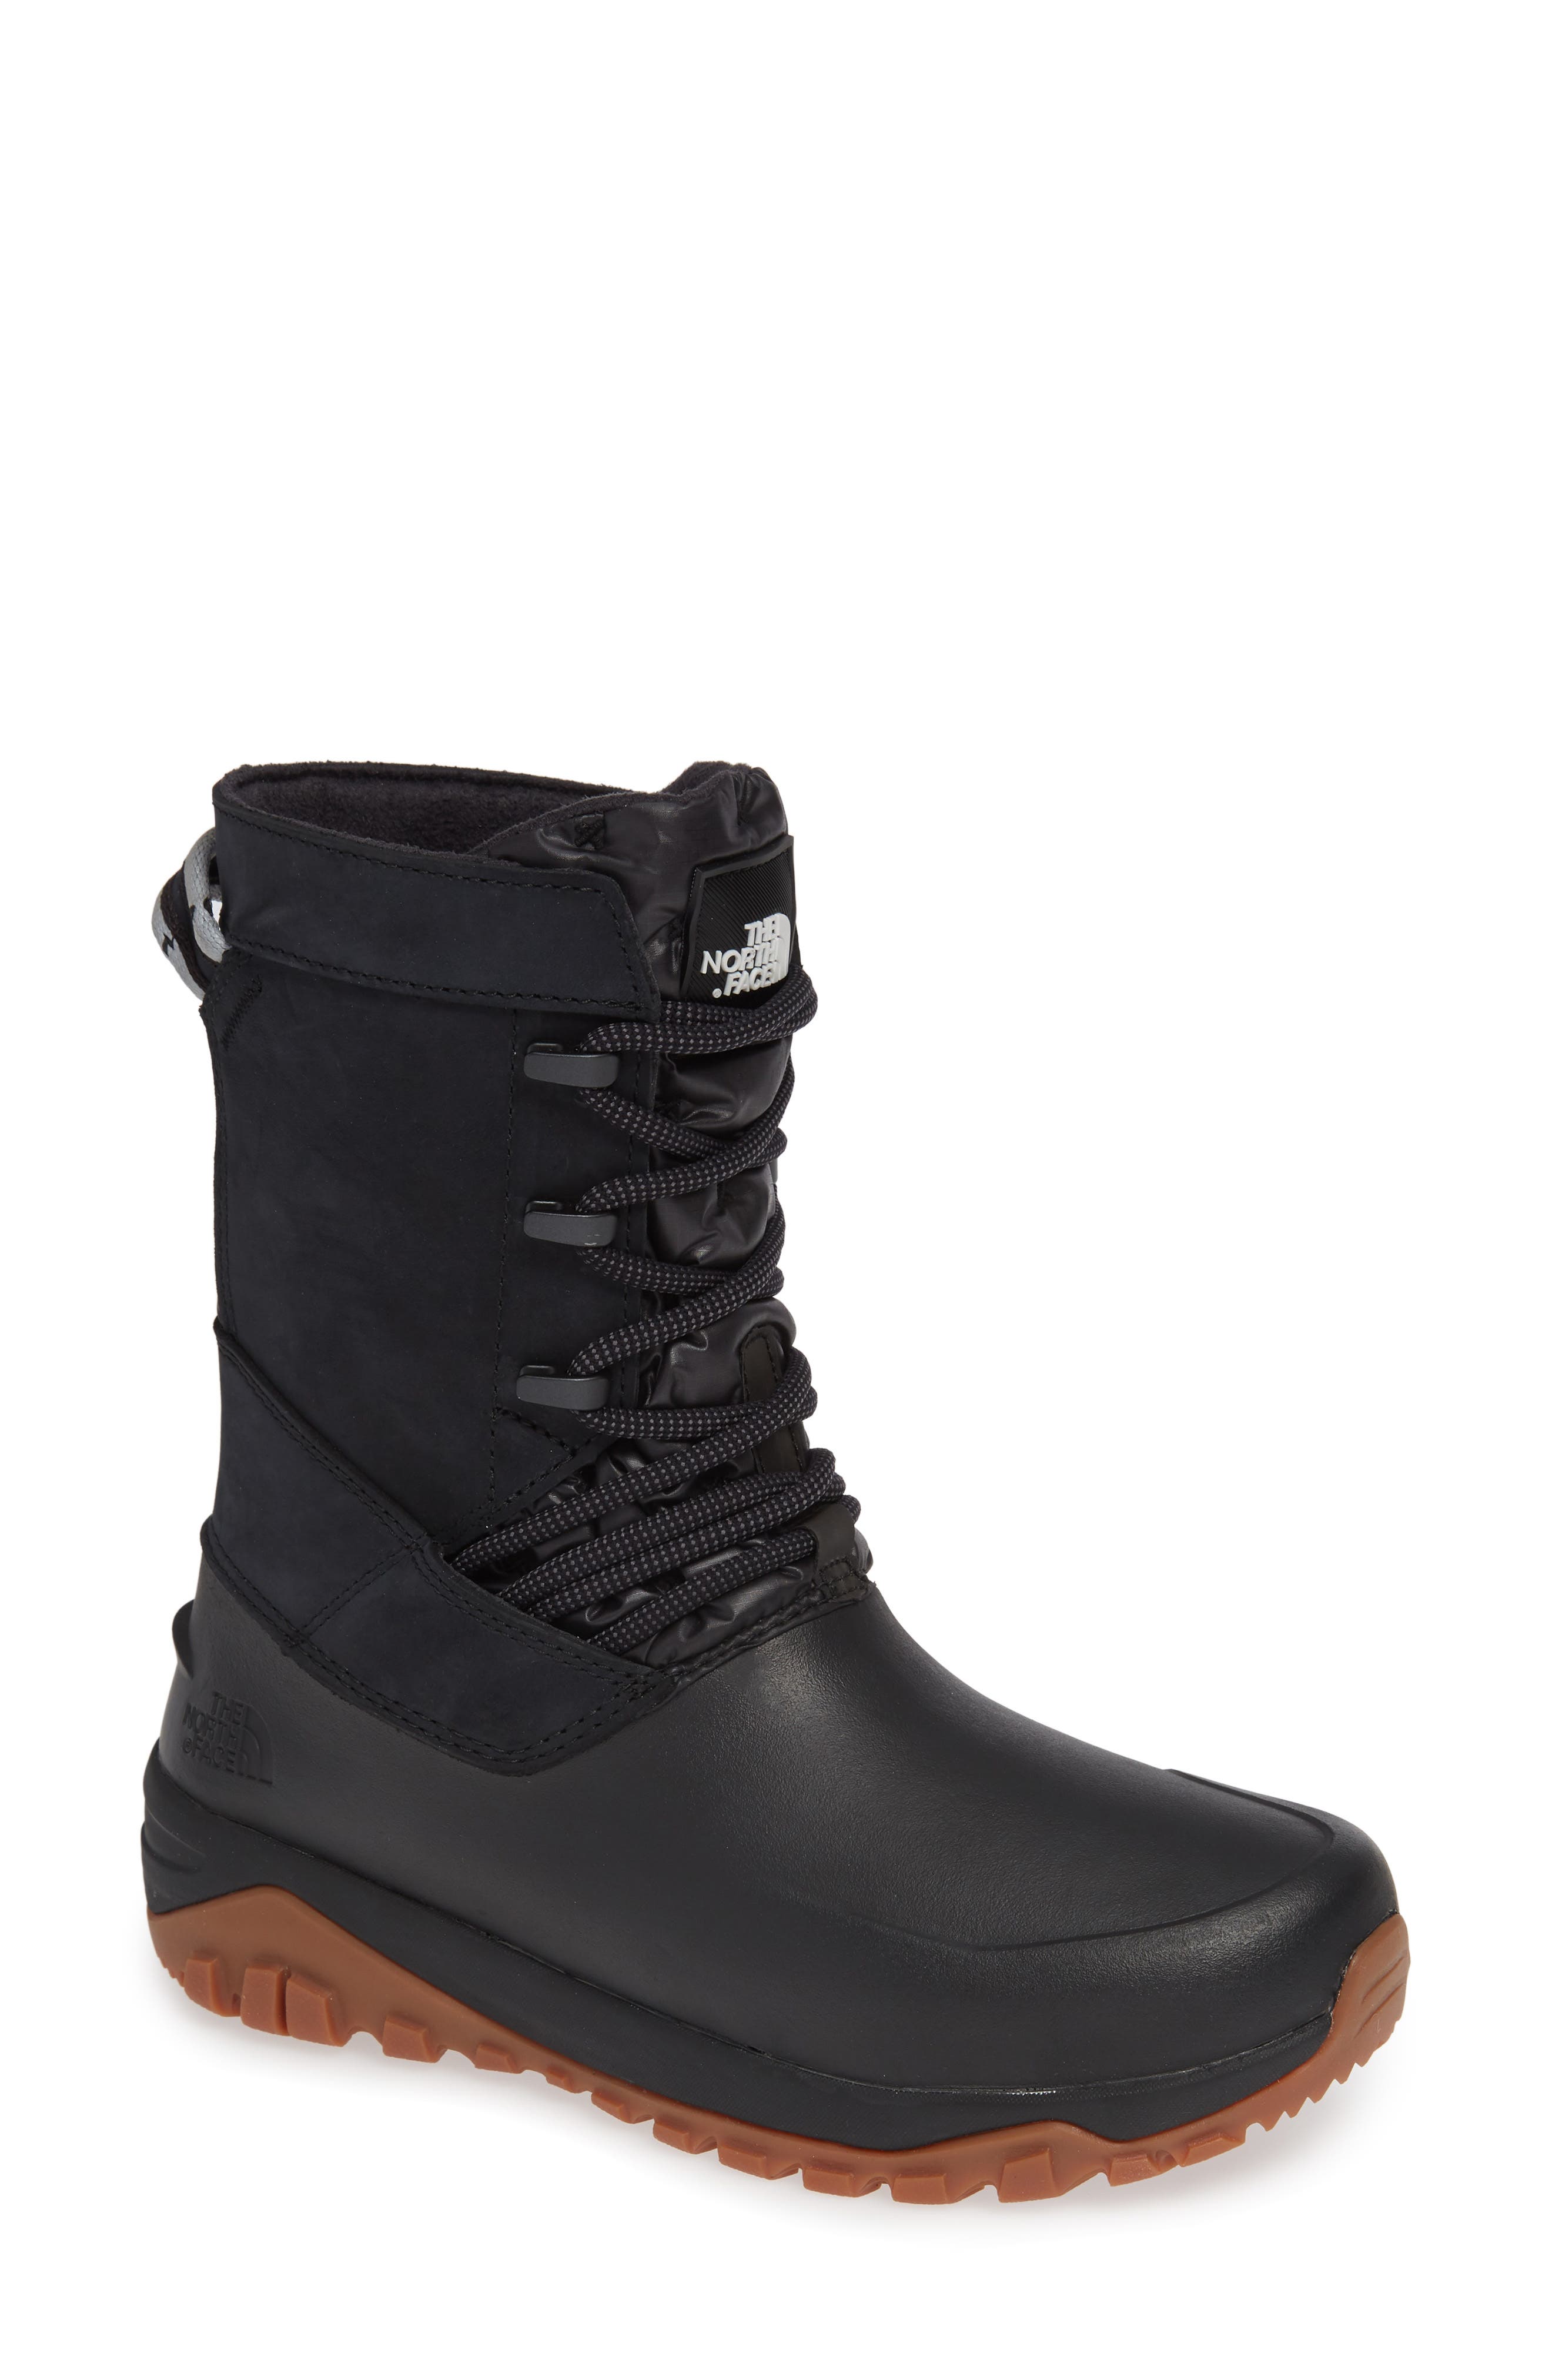 north 4 womens boots